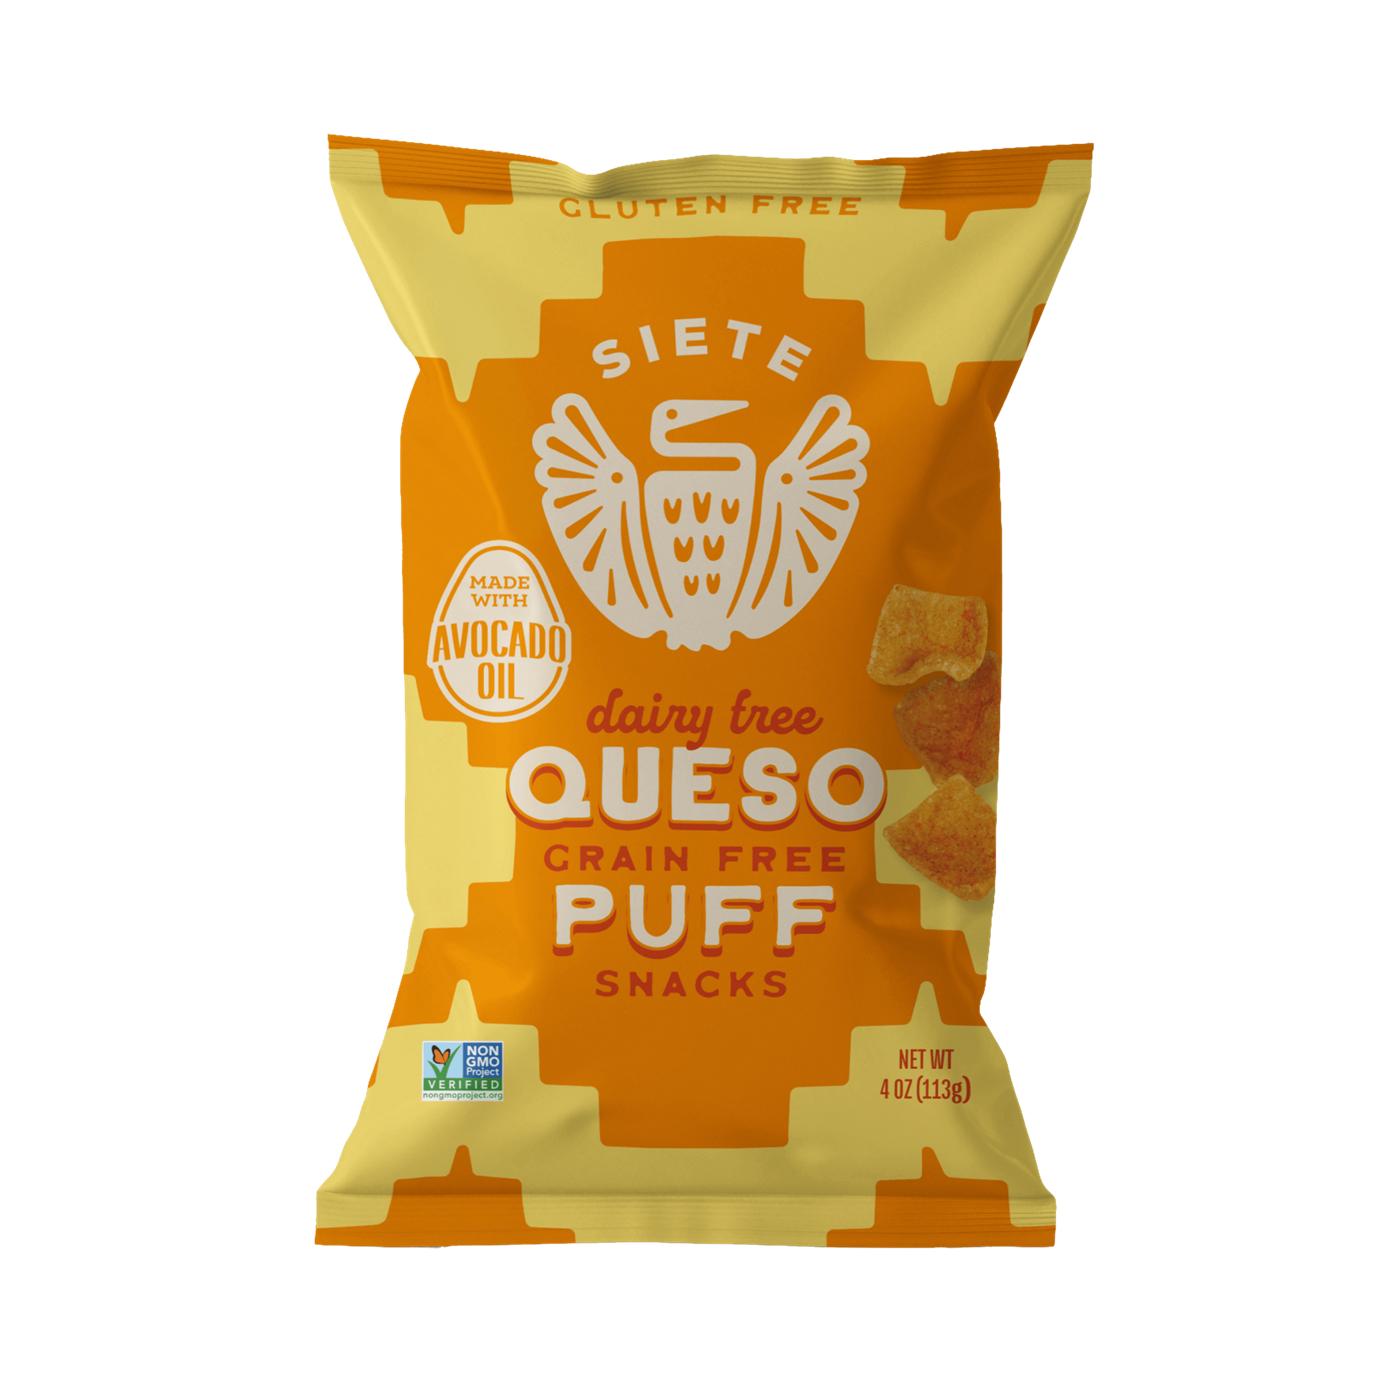 Siete Dairy Free Queso Grain-Free Puffs; image 1 of 2